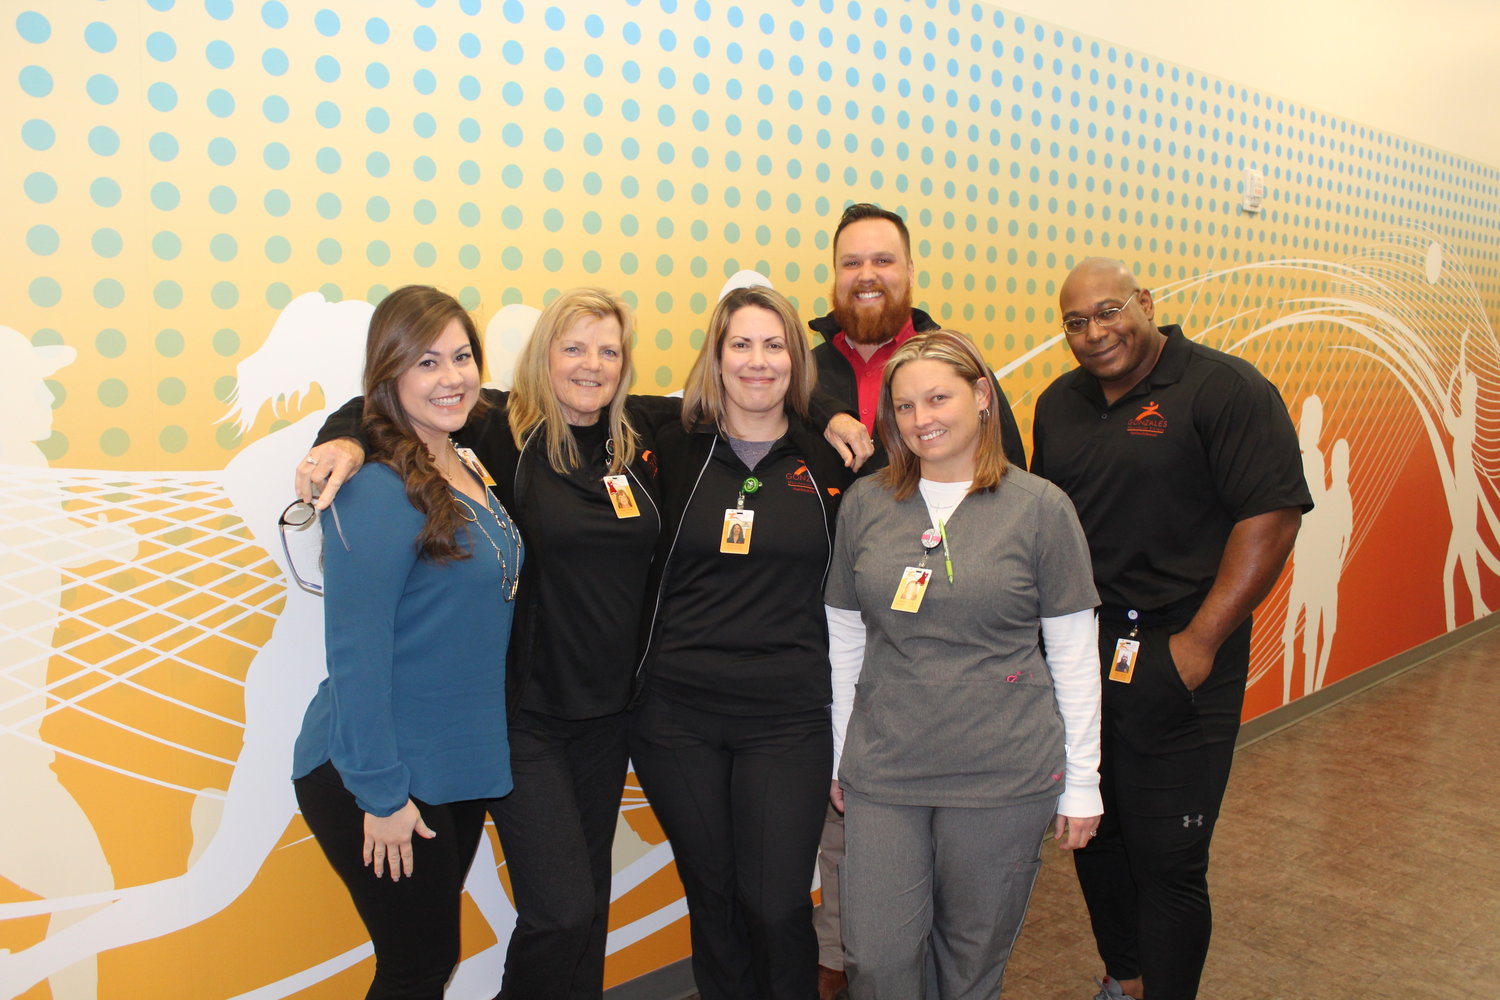 Thrive management and staff are operating one of Gonzales’ most-important community assets. Pictured are: Melissa Collazo, Robin Tinsley, Belle Ducote, Jennifer Scott, Dewey Smith and Cedric Nichols.